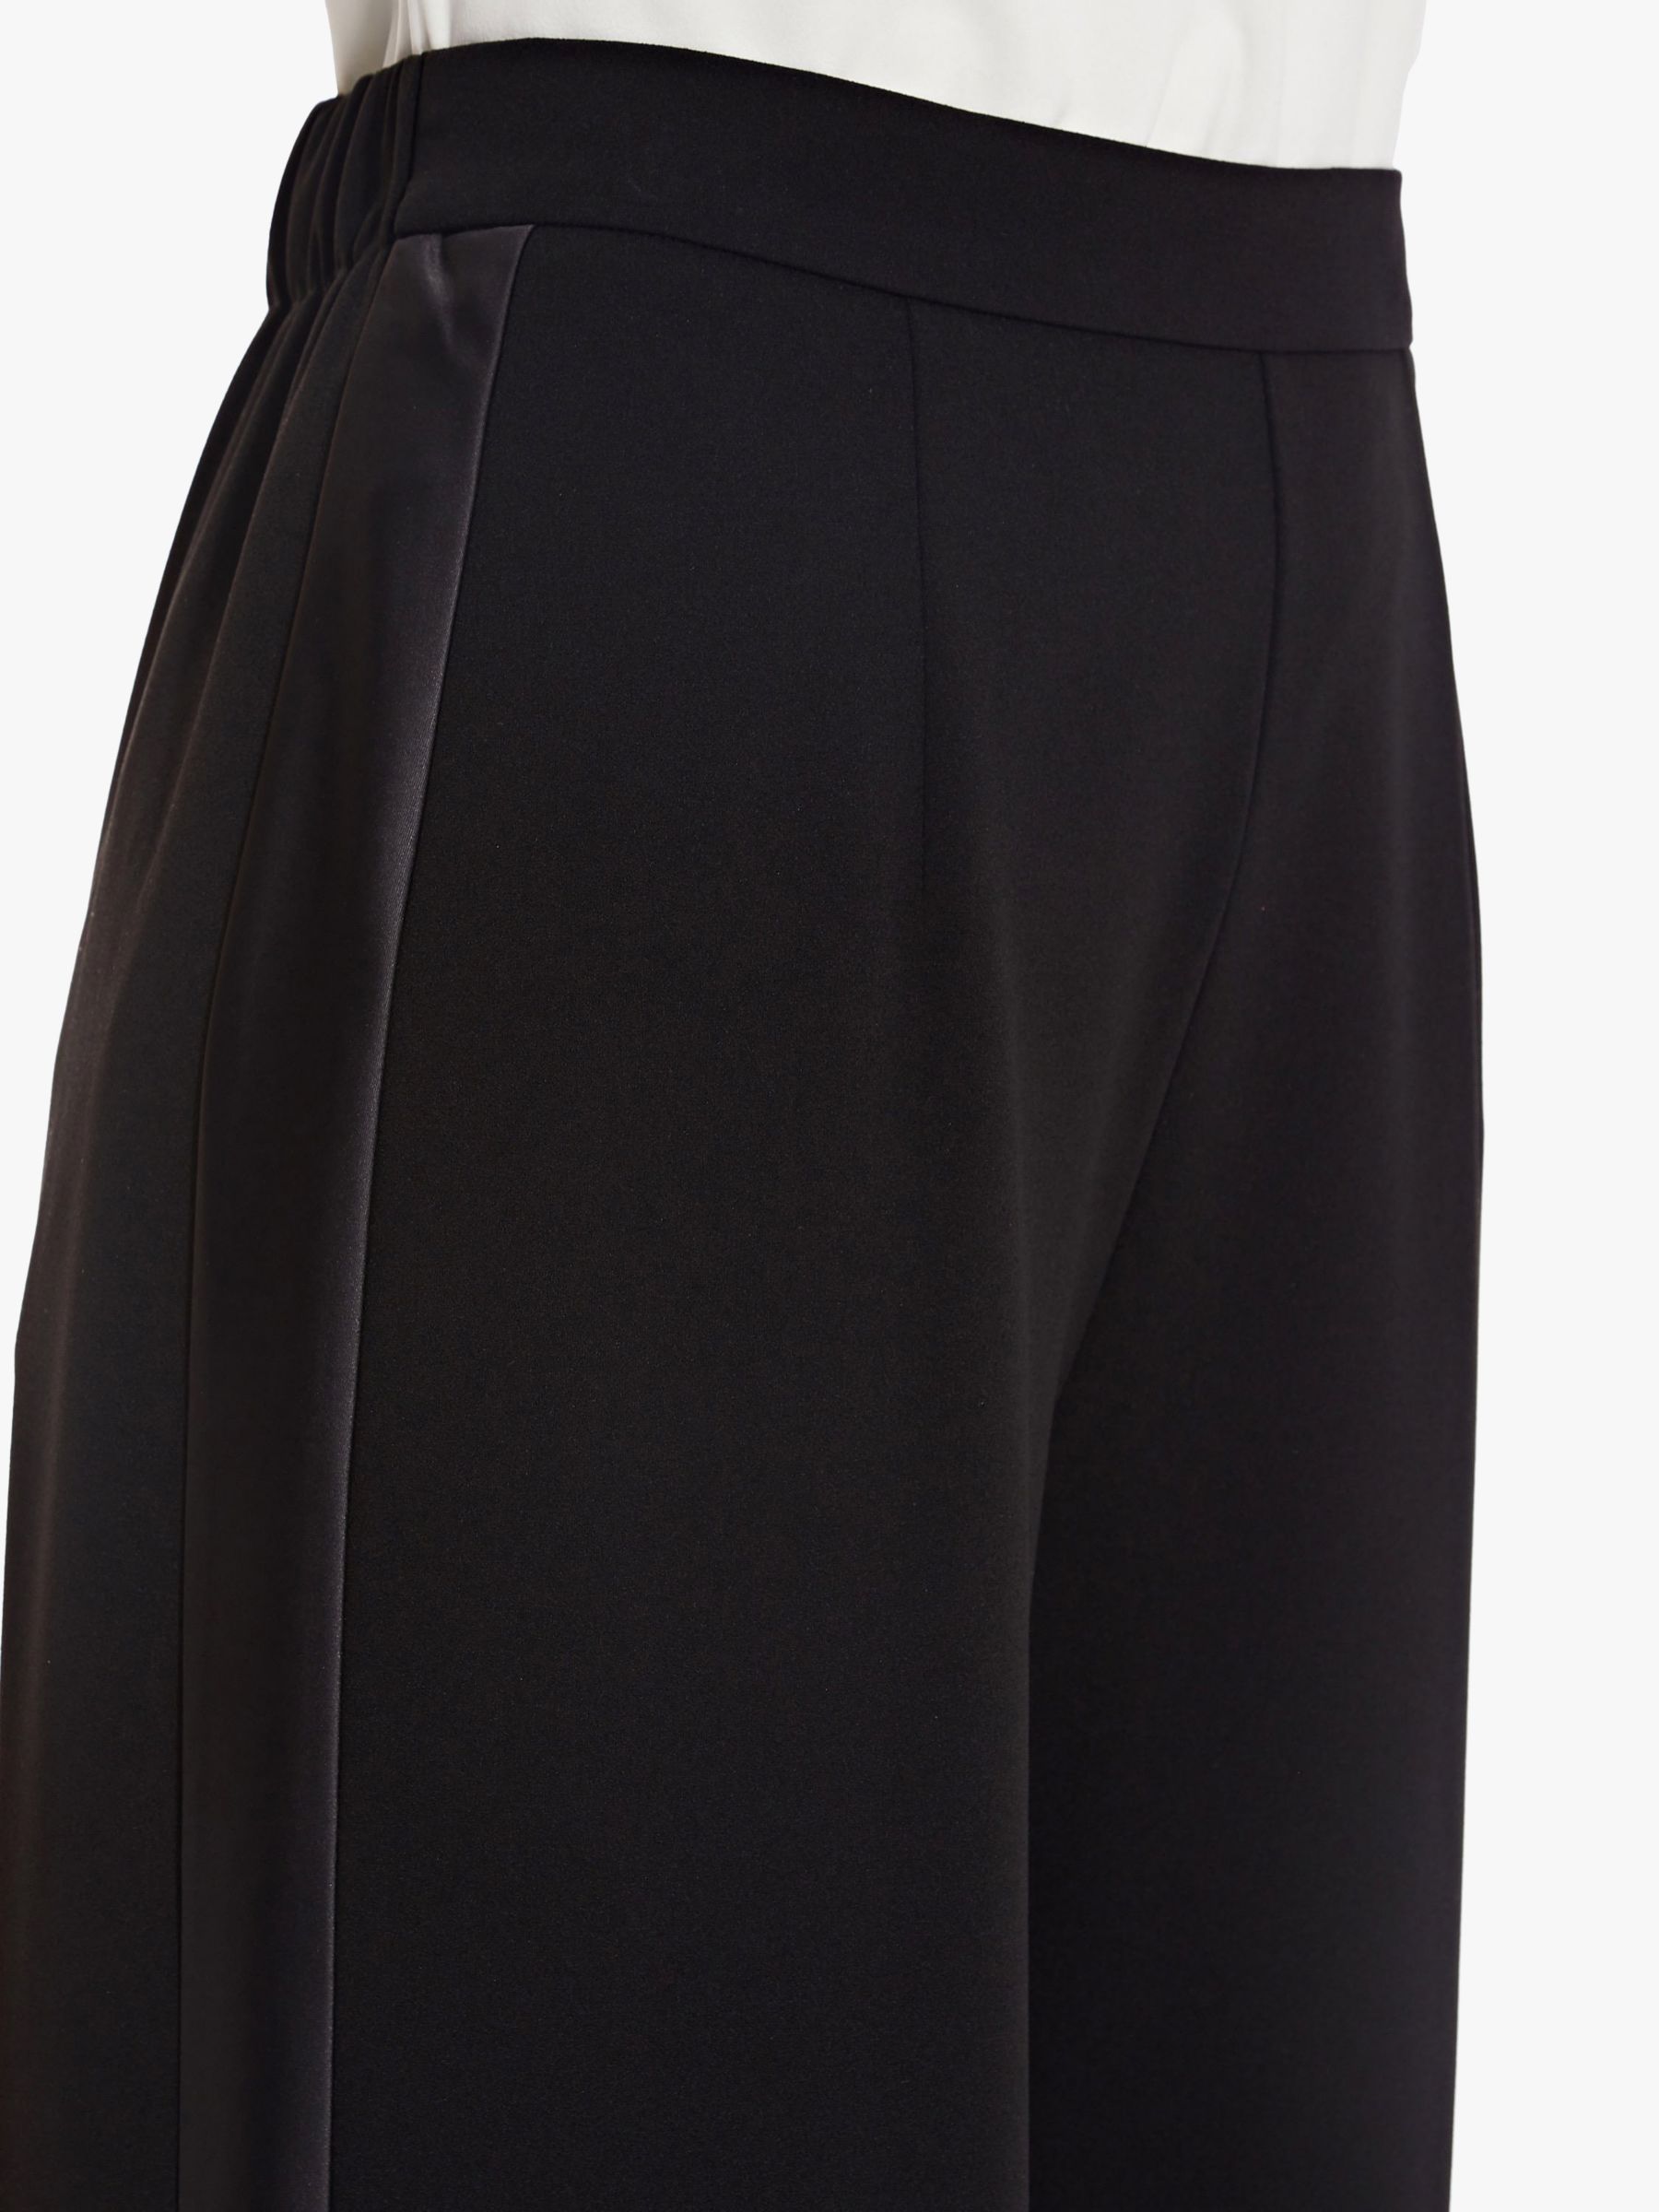 Buy Adrianna Papell Crepe Tuxedo Trousers, Black Online at johnlewis.com